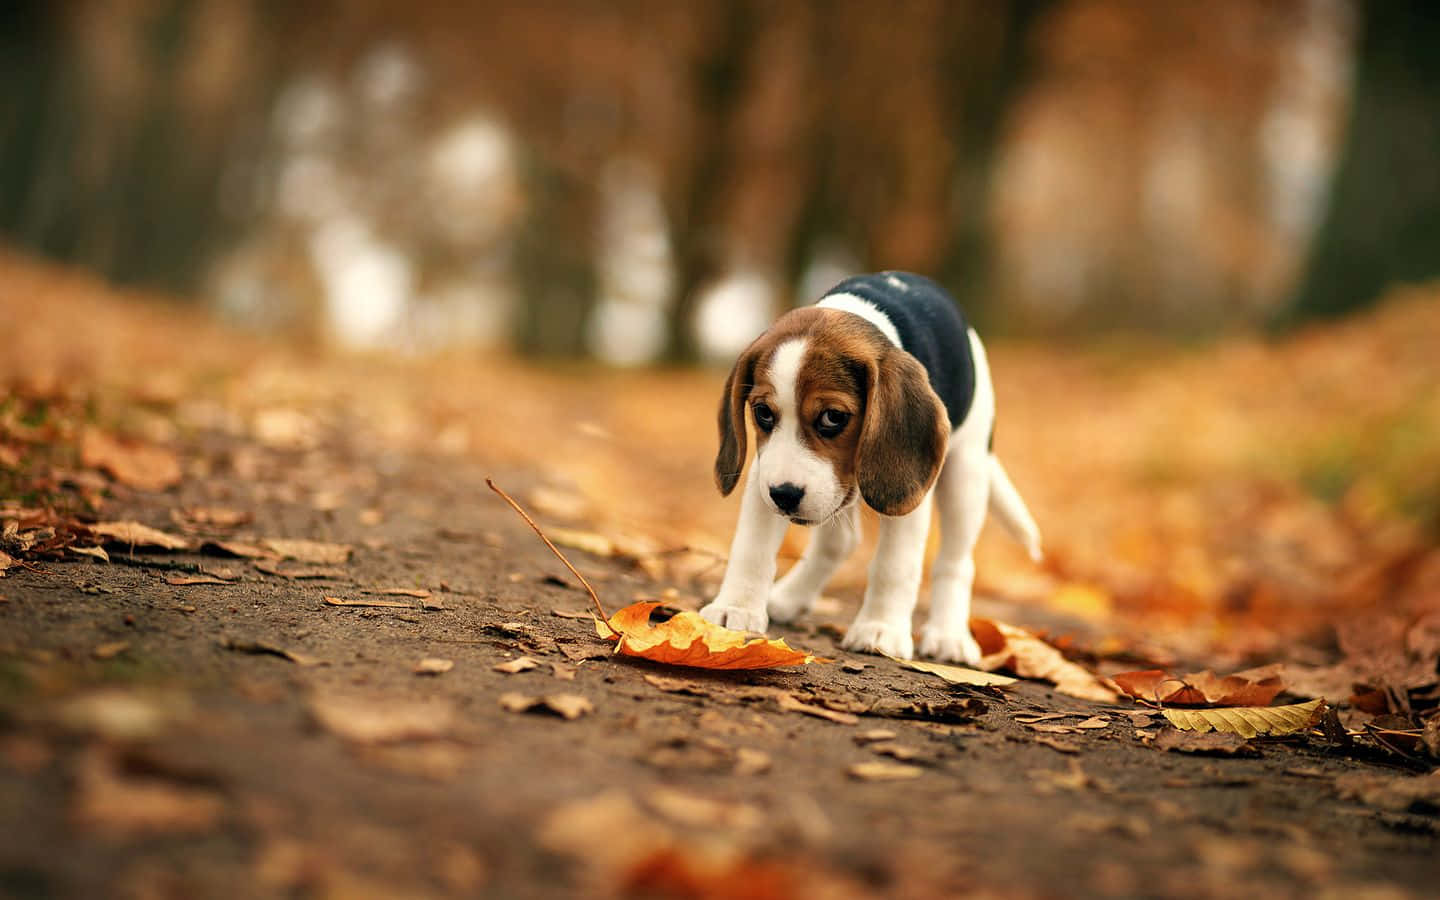 A Dog Walking Through The Leaves In The Woods